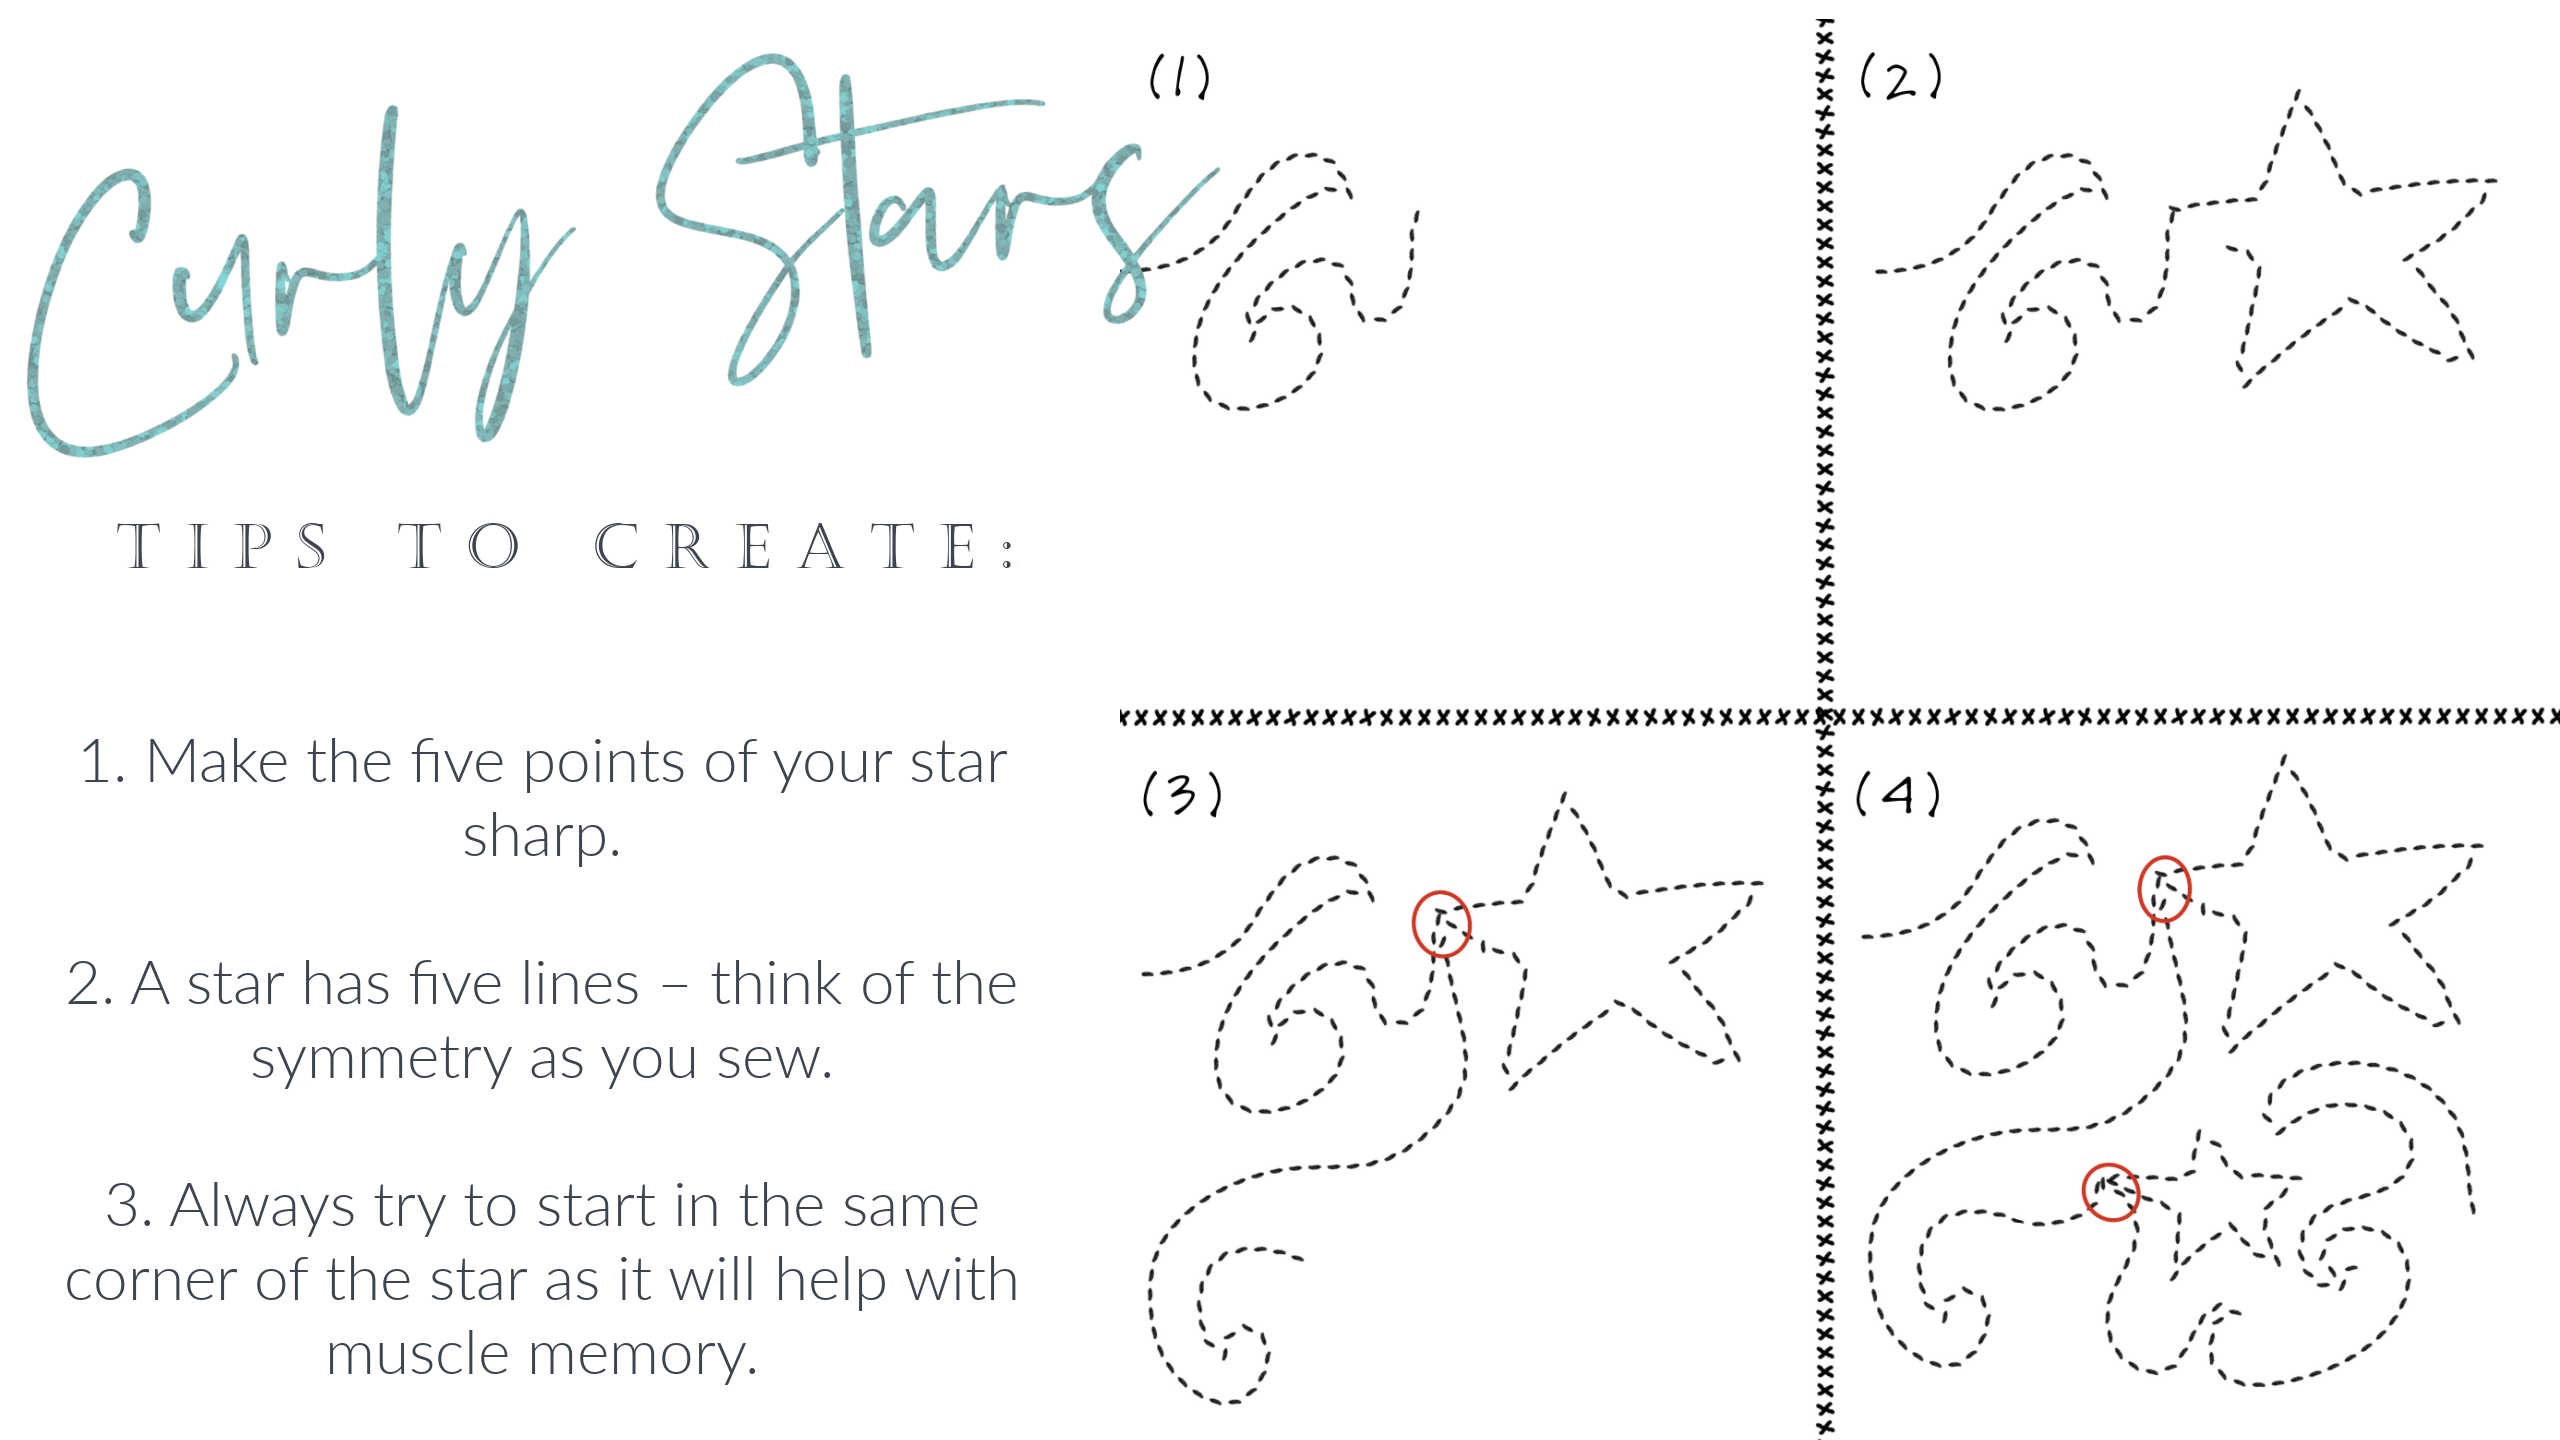 Learn How to Free Motion Quilt Curly Stars with this Video Tutorial